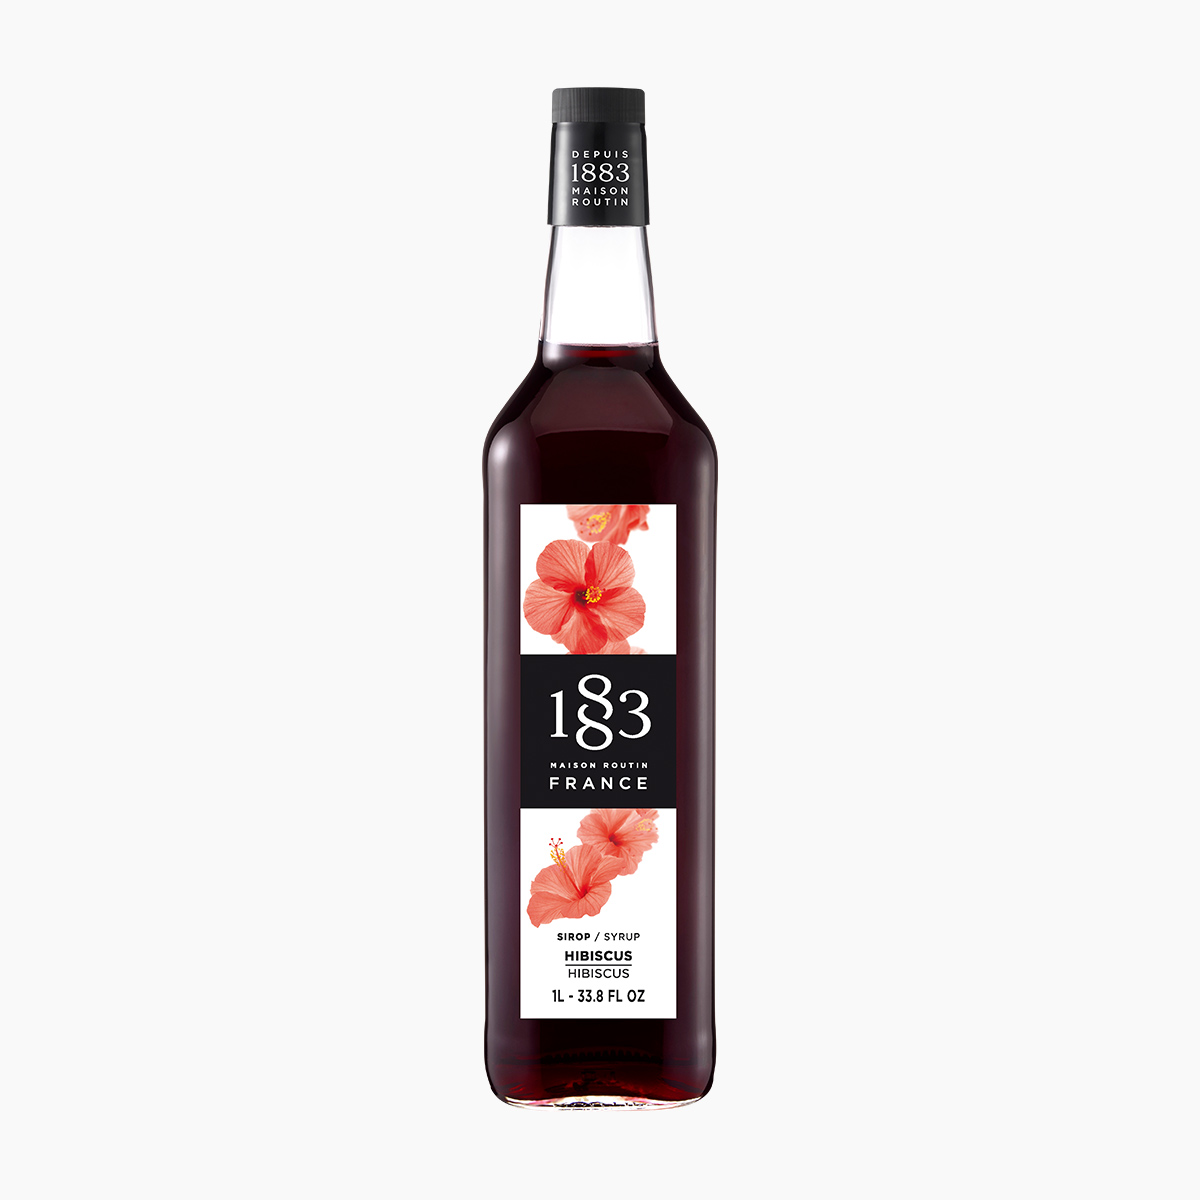 HIBISCUS SYRUP 1l